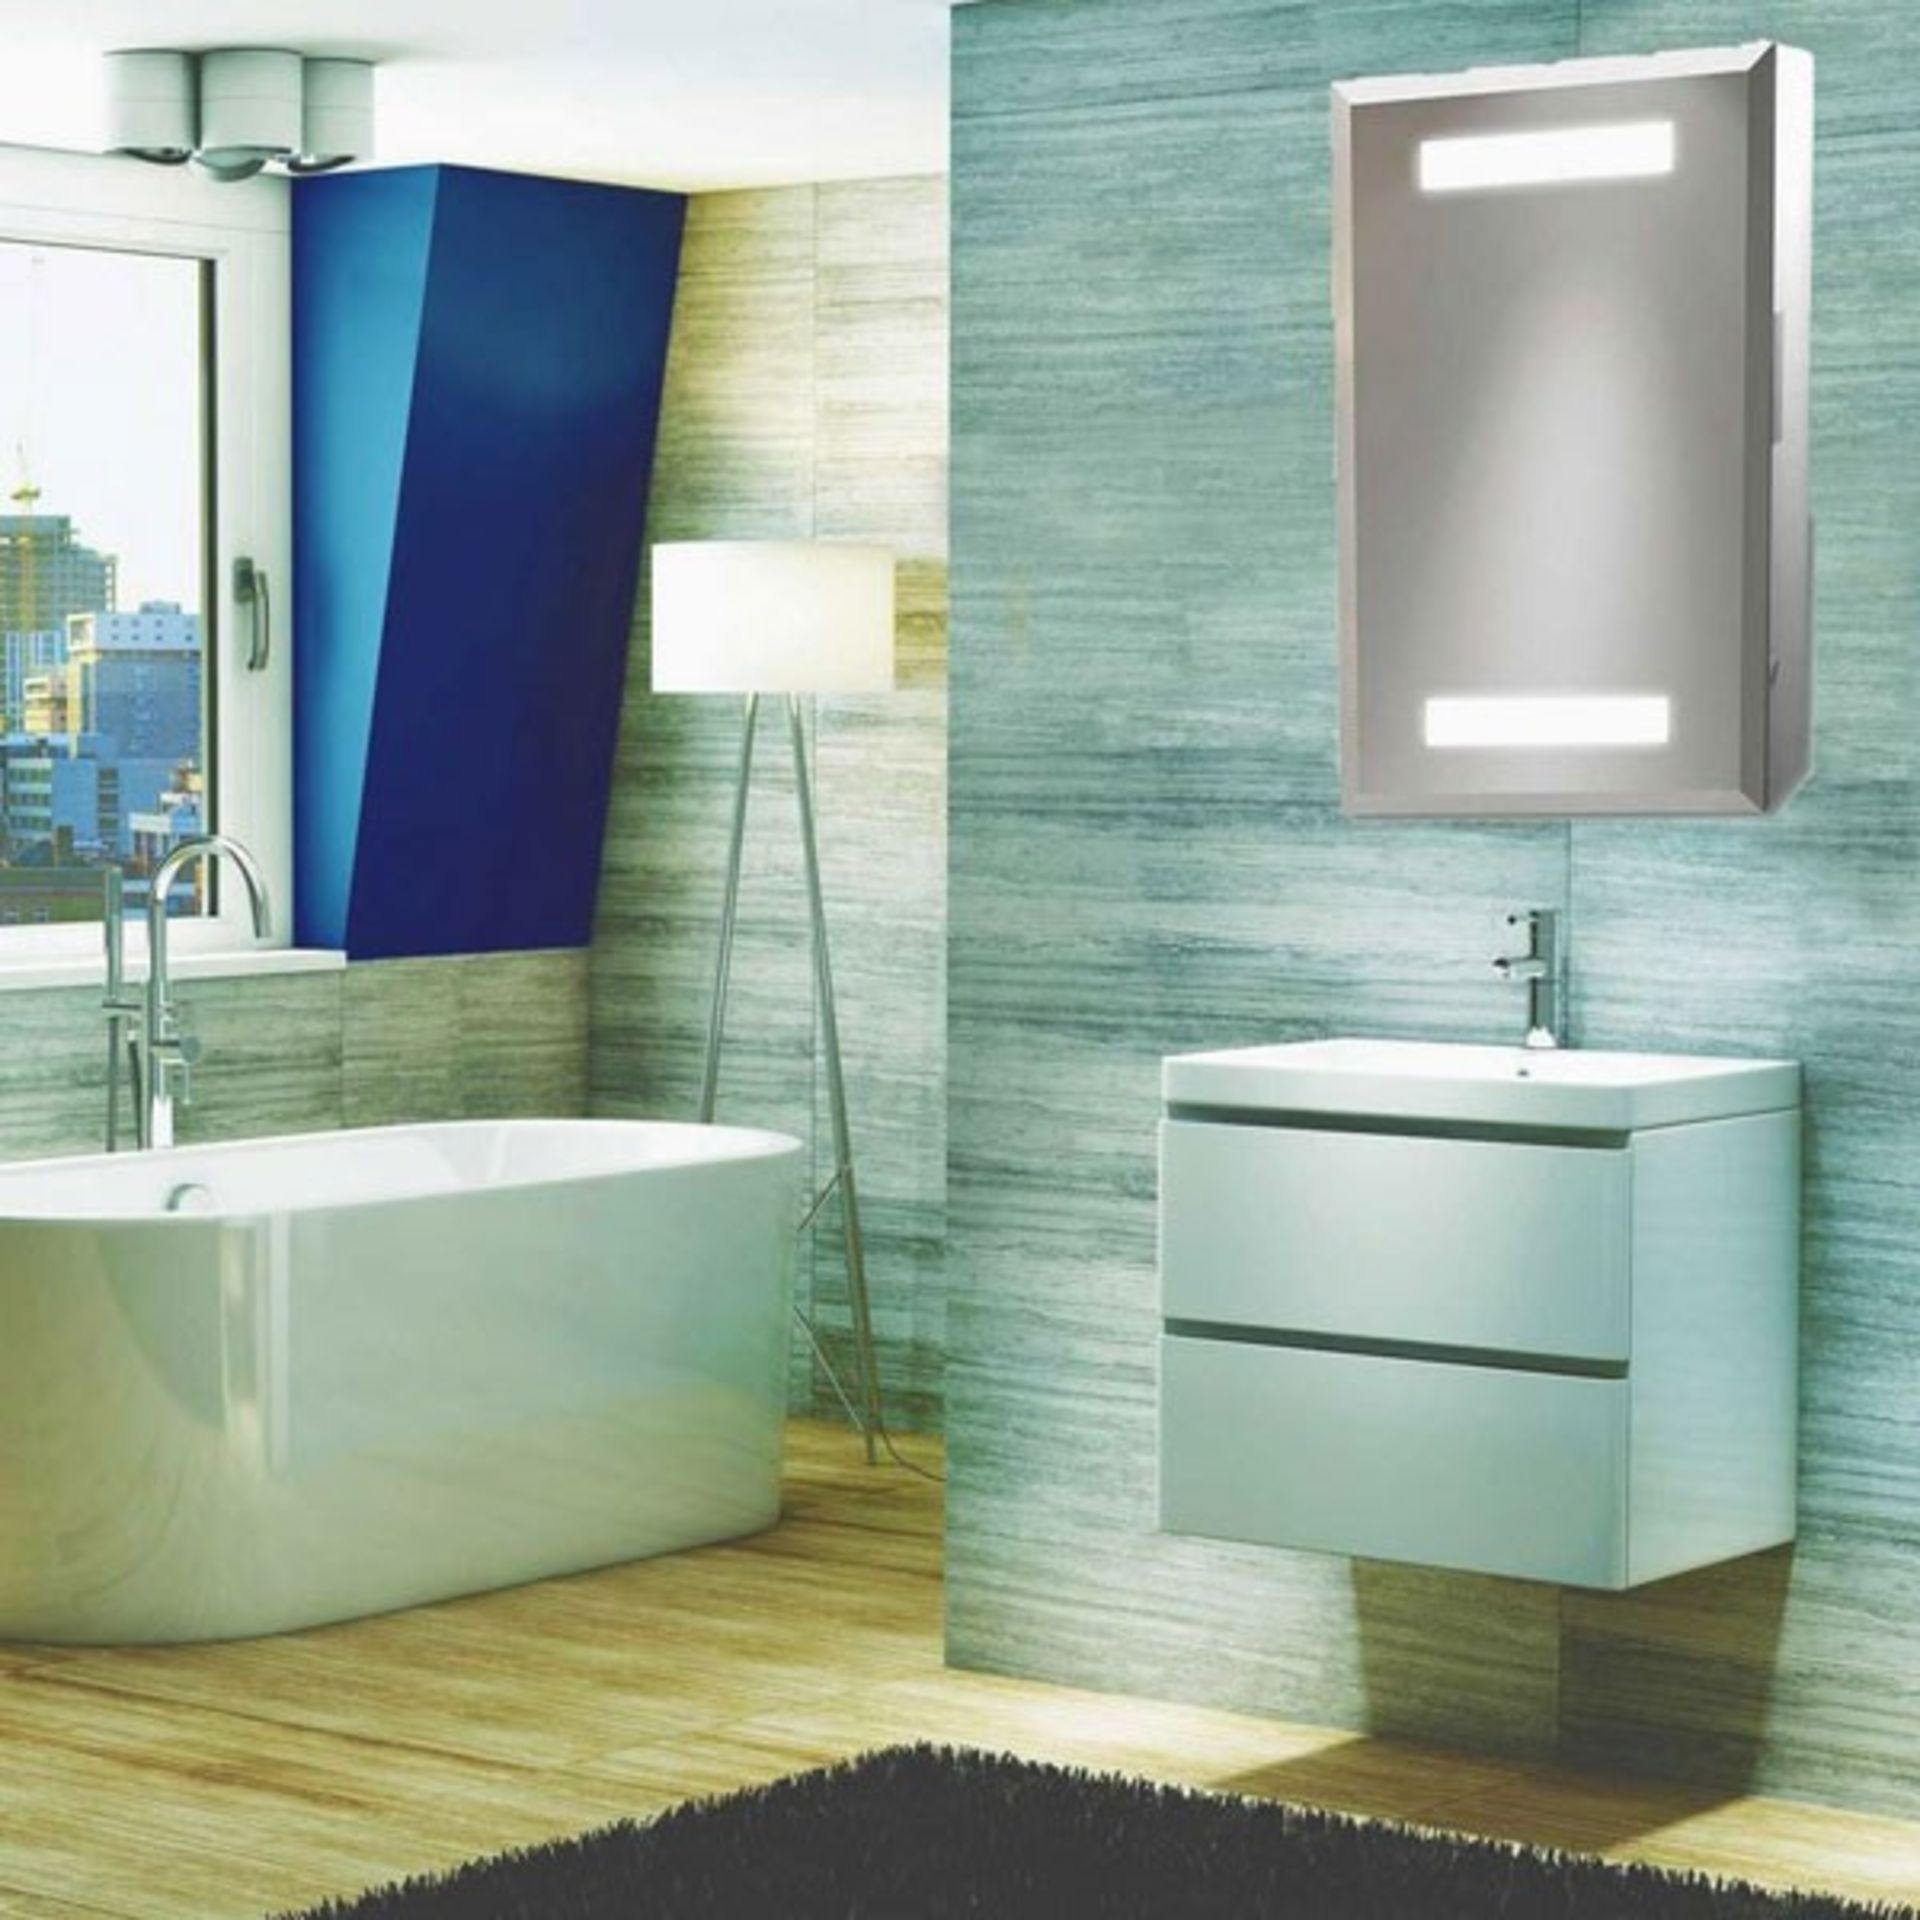 1 x Synergy Single Door Aluminium LED Mirrored Bathroom Cabinet - Contemporary Cabinet With - Image 2 of 11